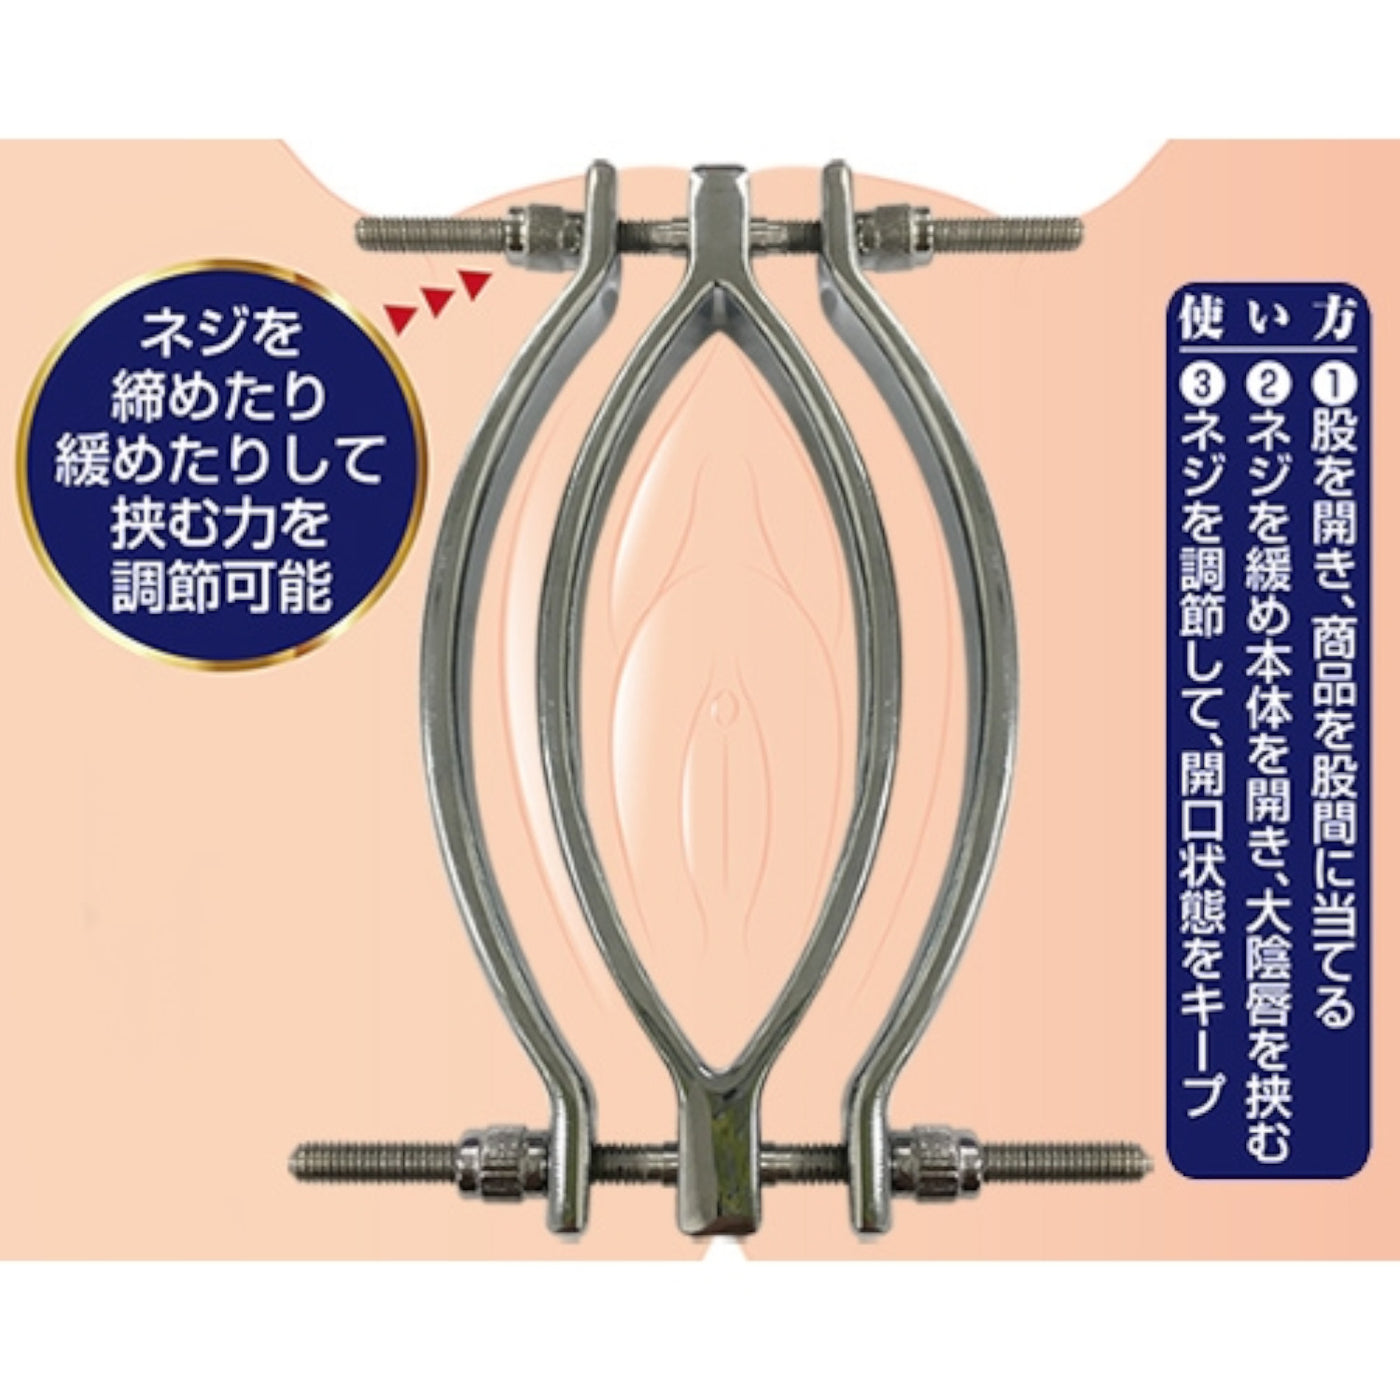 Japan A-One Pussy Clamp Labia-Spreading BDSM Tool